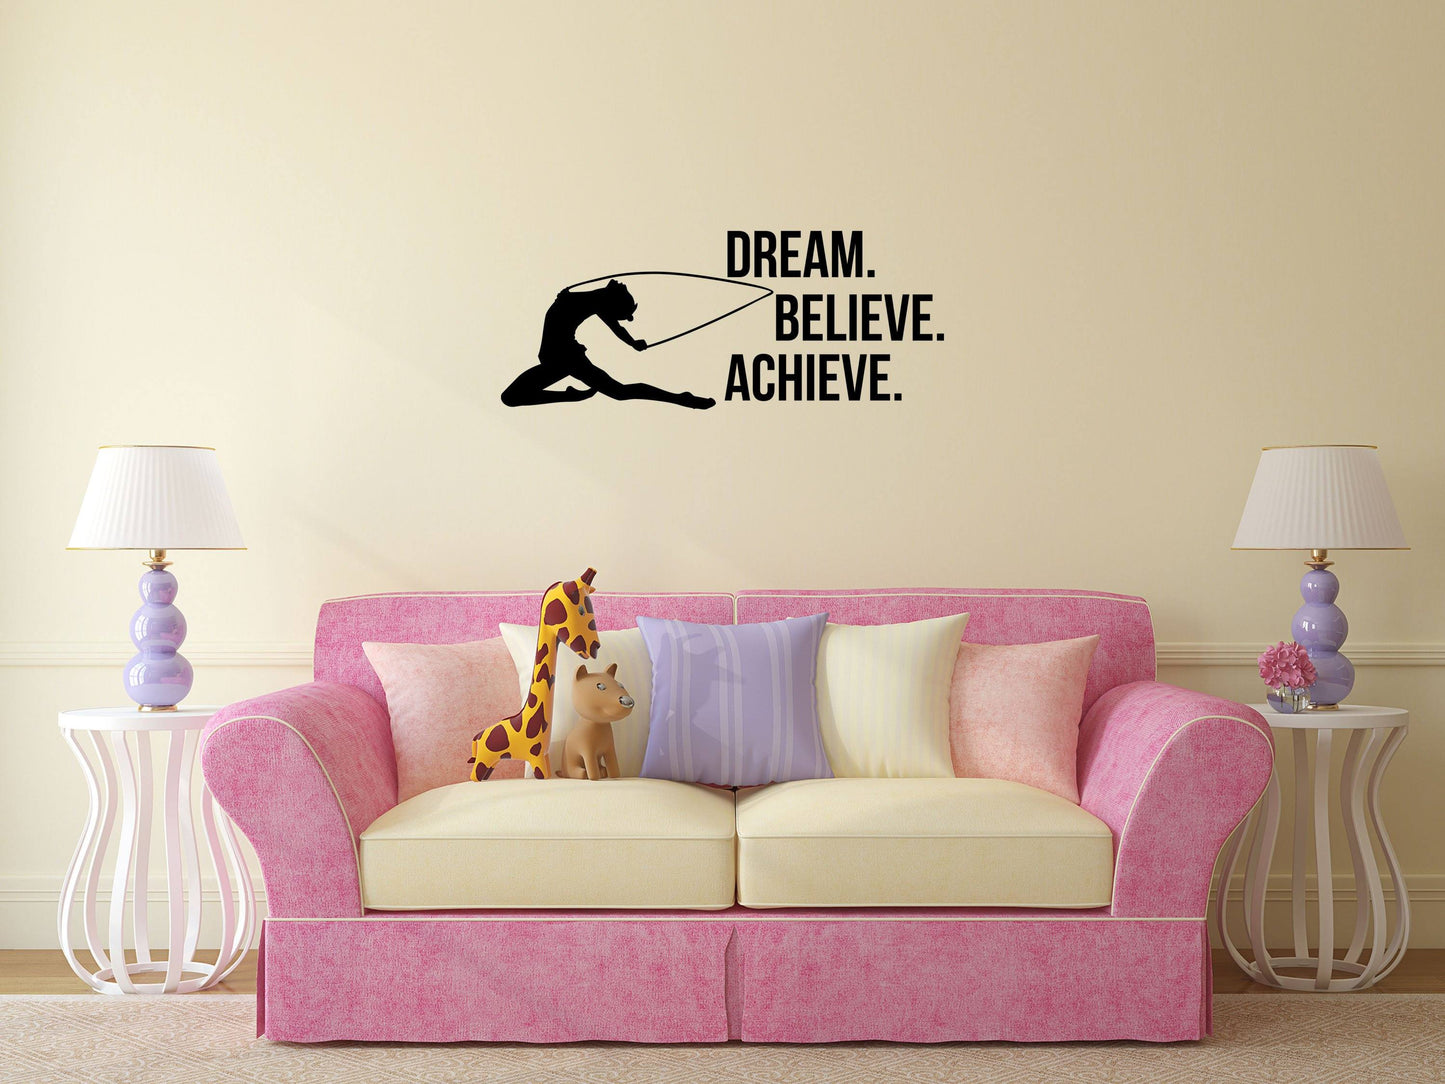 Dream Believe Achieve Gymnastics Quote Sticker - Inspirational Wall Decals Vinyl Wall Decal Inspirational Wall Signs 